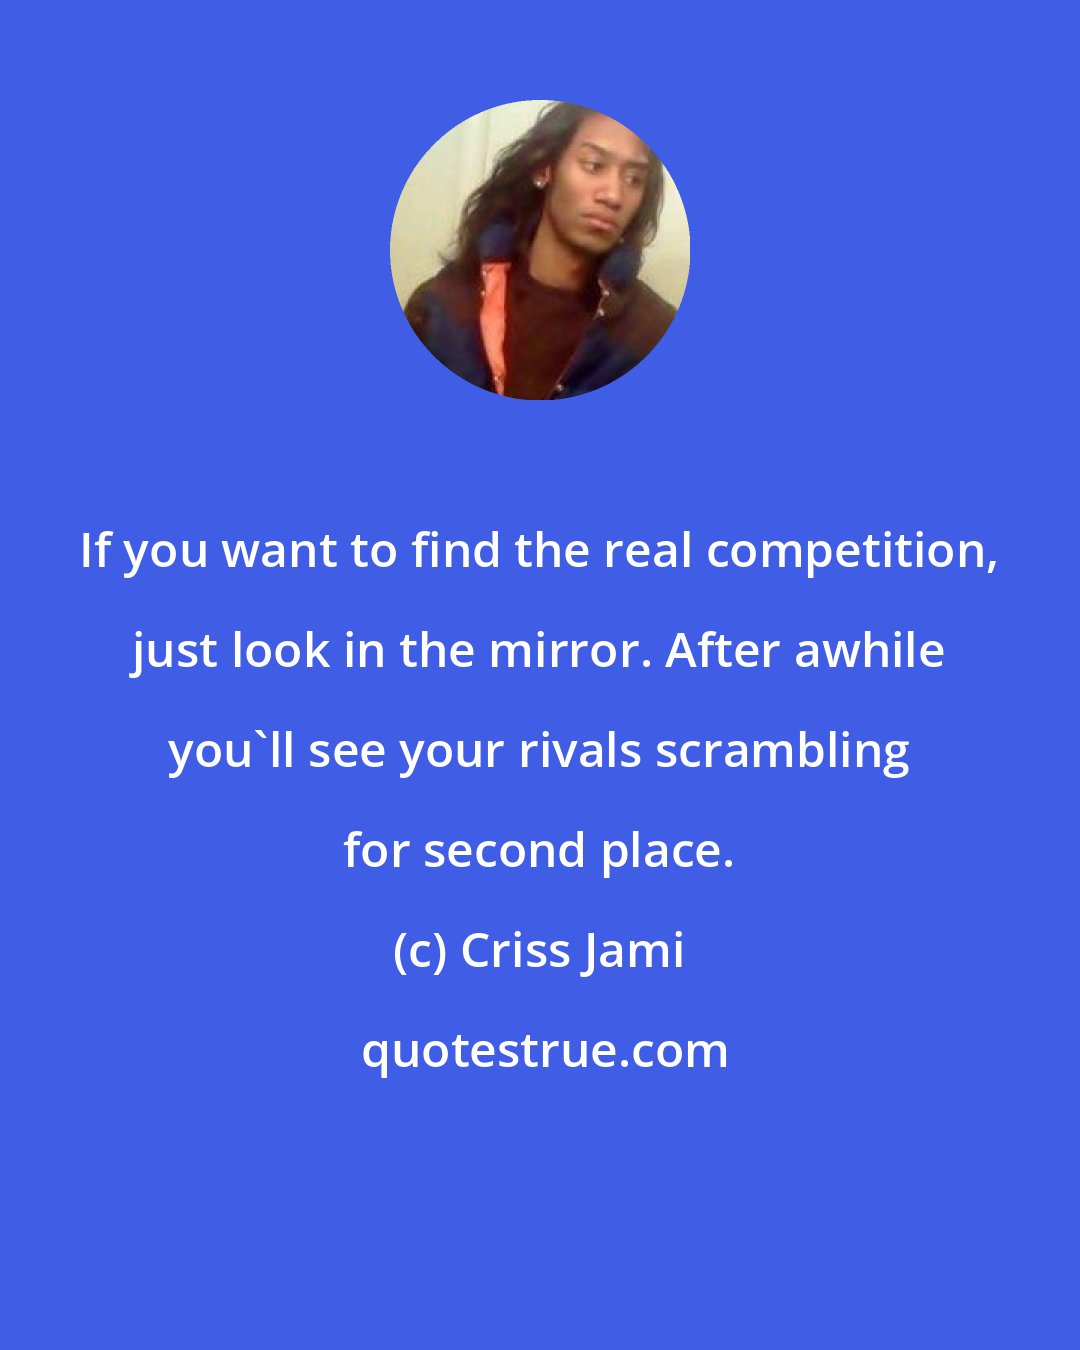 Criss Jami: If you want to find the real competition, just look in the mirror. After awhile you'll see your rivals scrambling for second place.